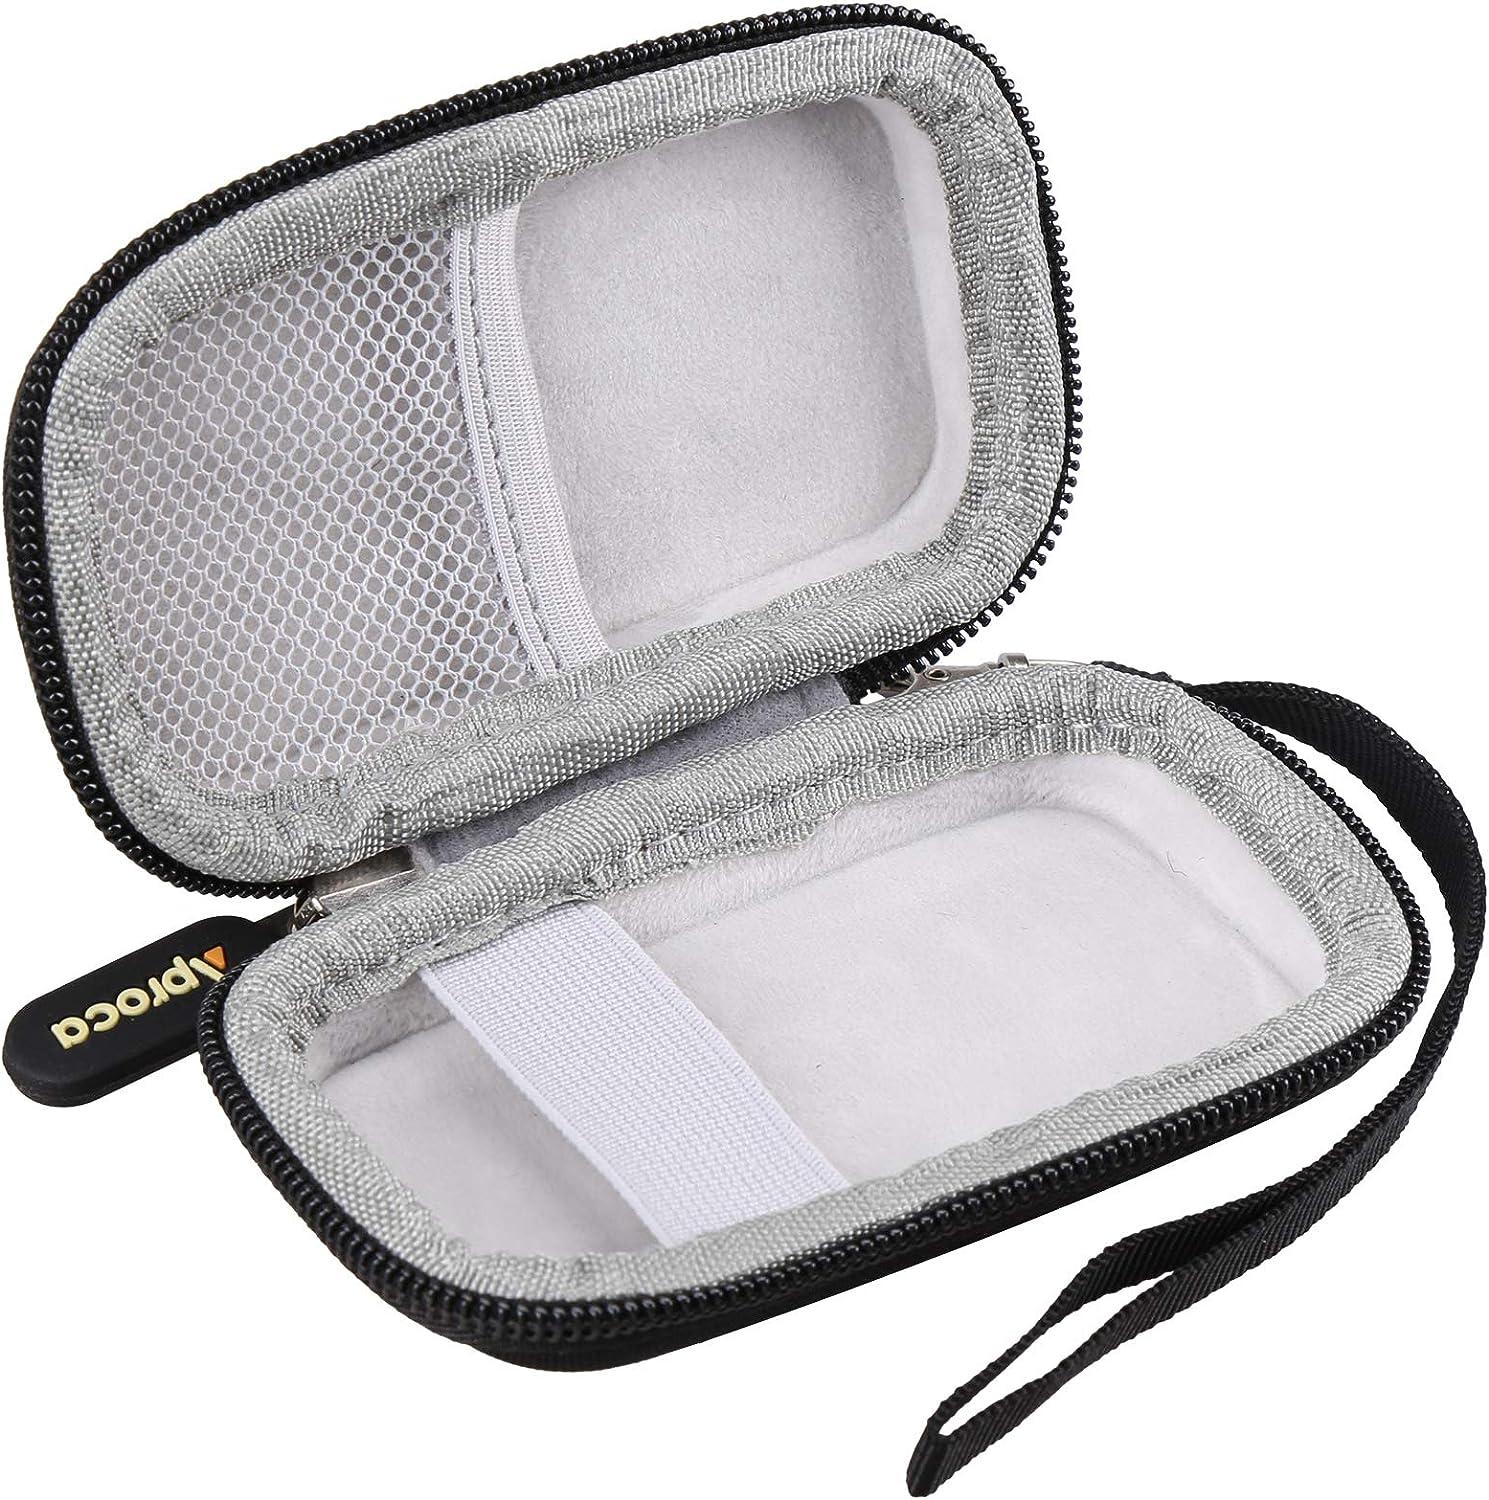 Aproca Hard Travel Storage Case,for Withings BPM Connect Digital Wi-Fi Smart Blood Pressure Monitor